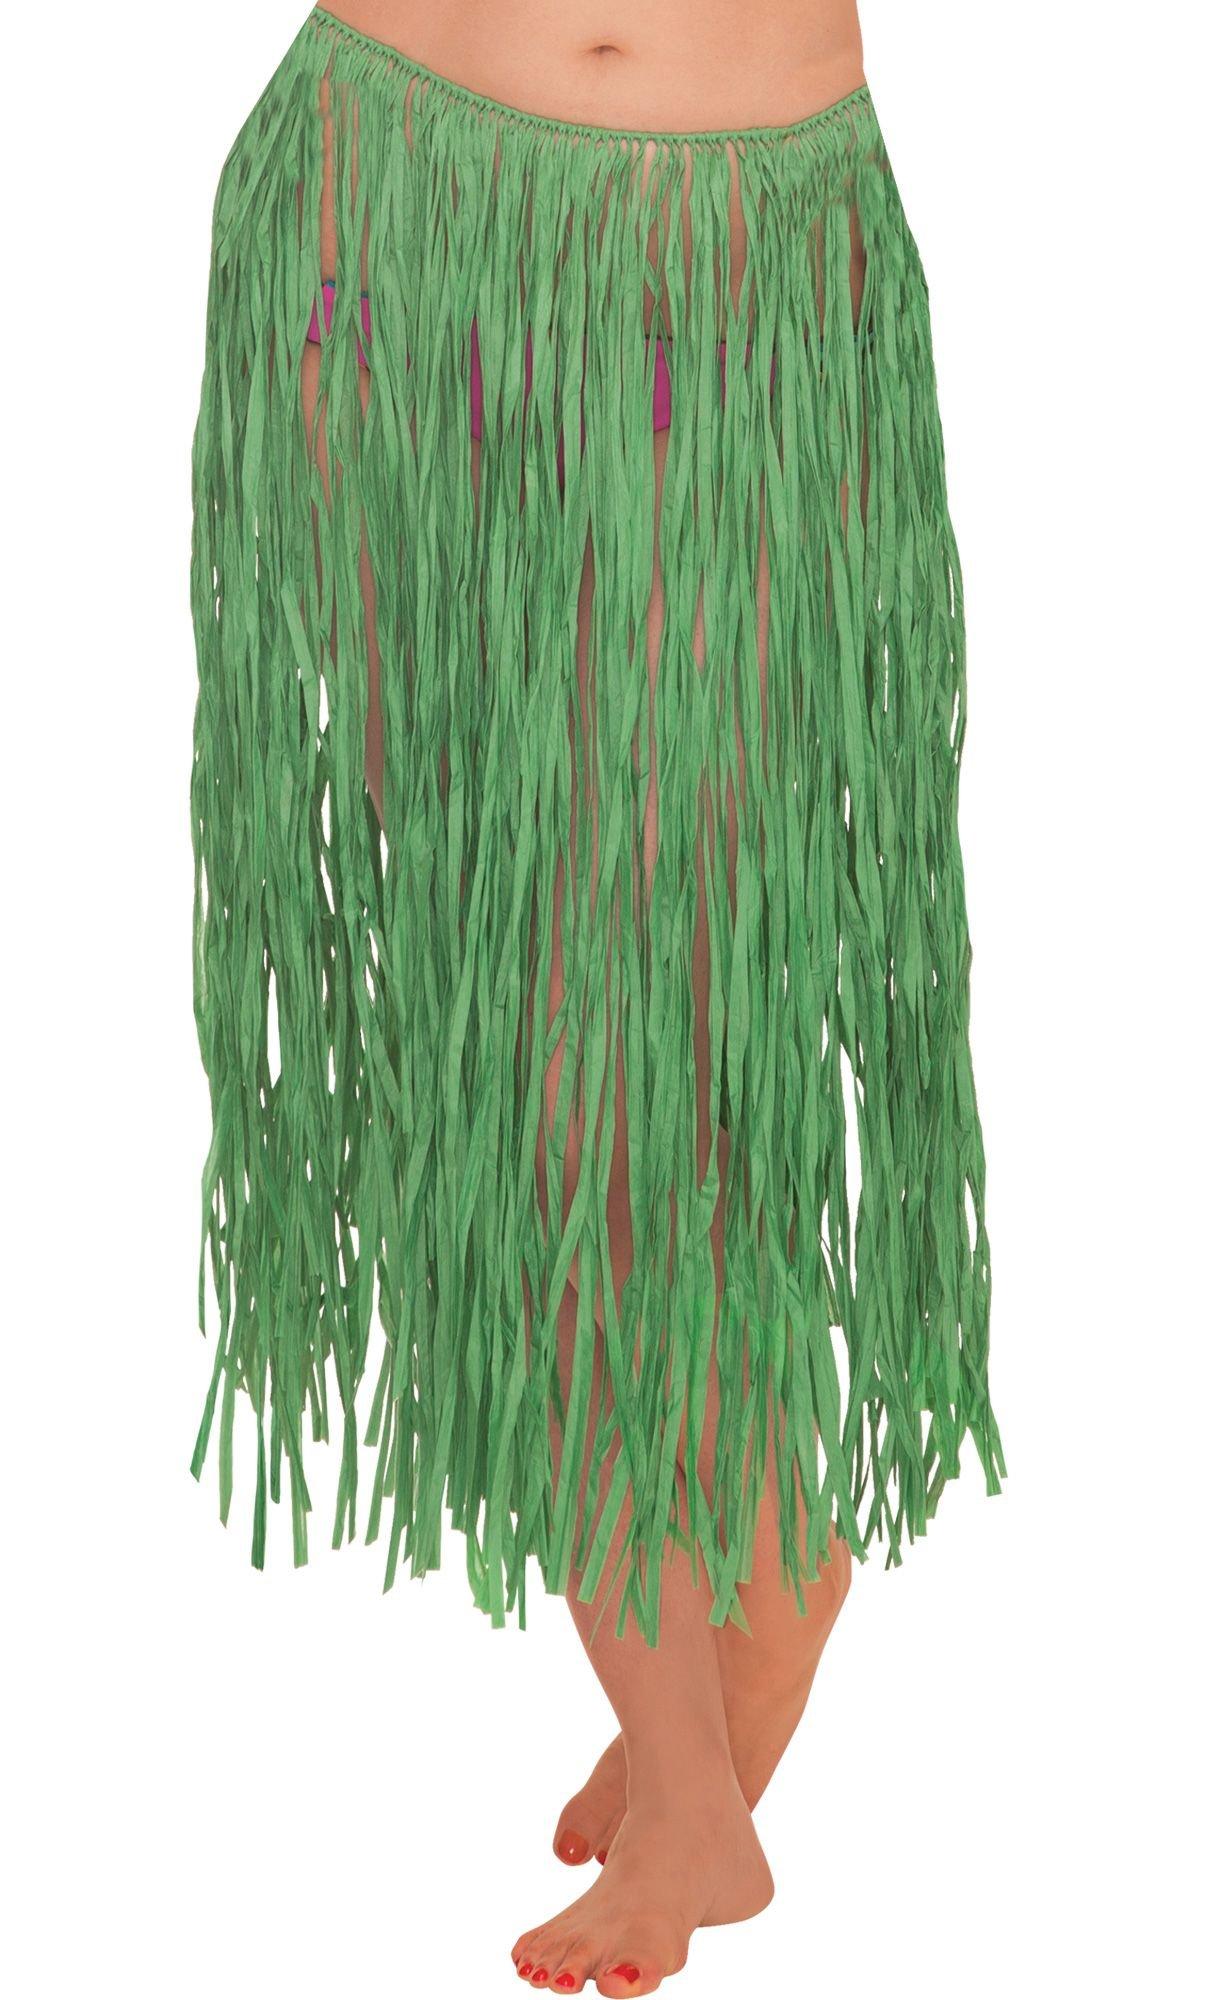 Natural Color Grass Skirt Hawaiian - 36x32in - Hula Girl - Luau Party -  After Halloween Sale- under $20